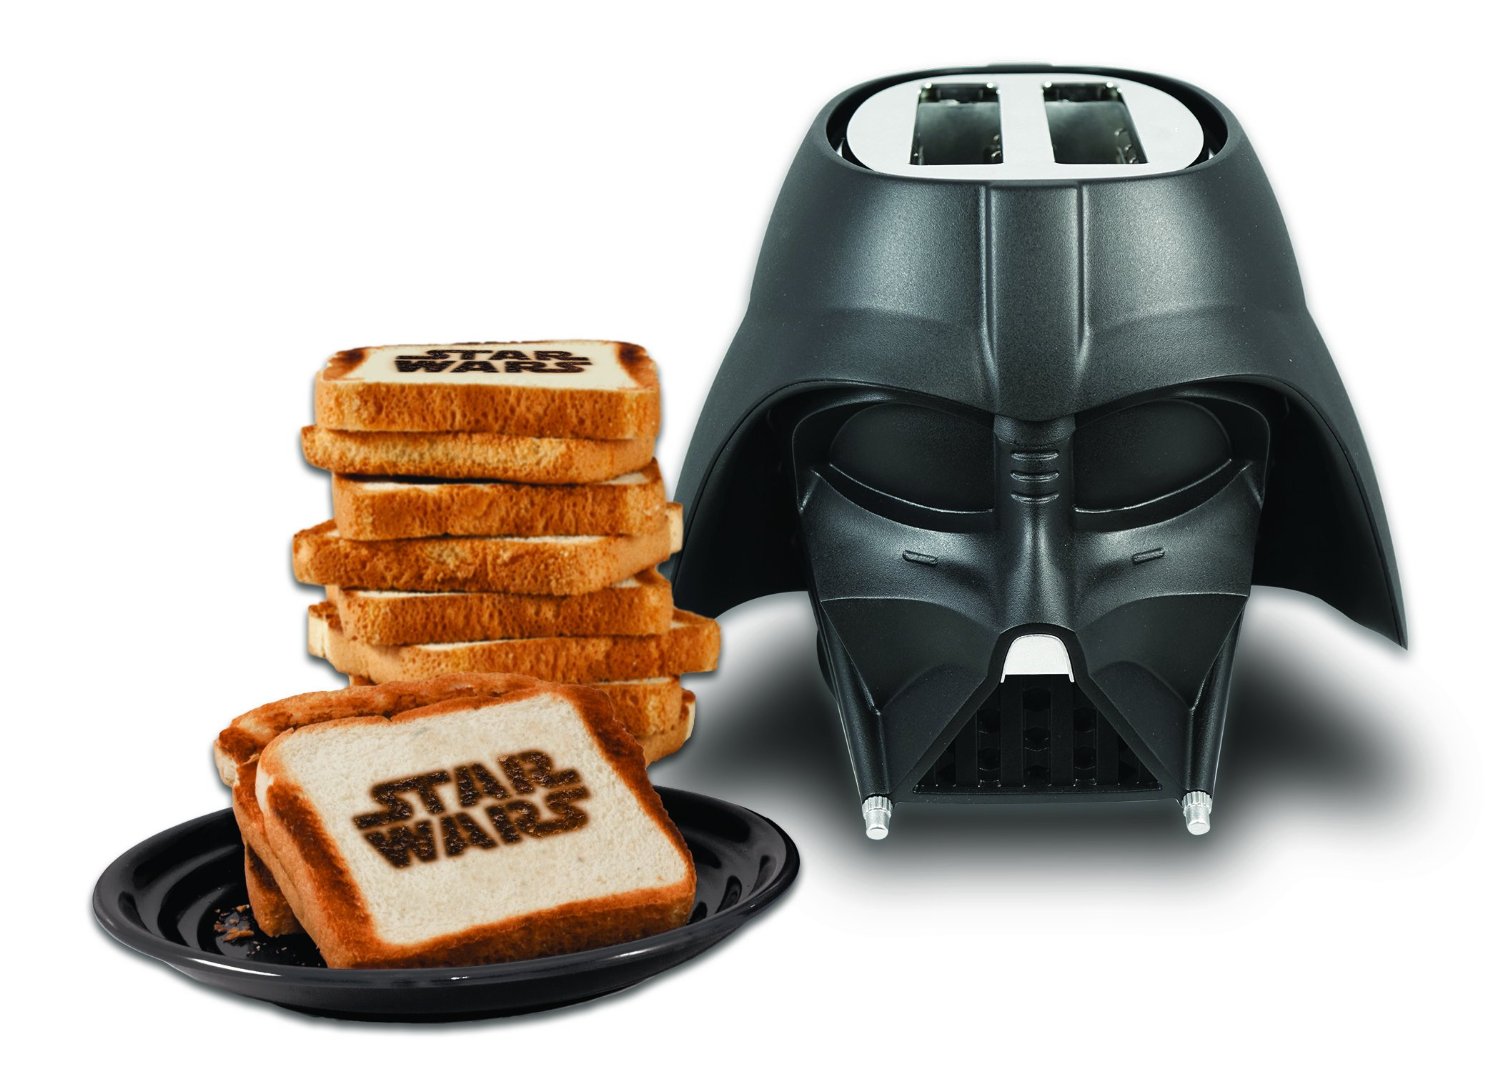 Darth Vader Toaster Only $21.99 on Amazon!